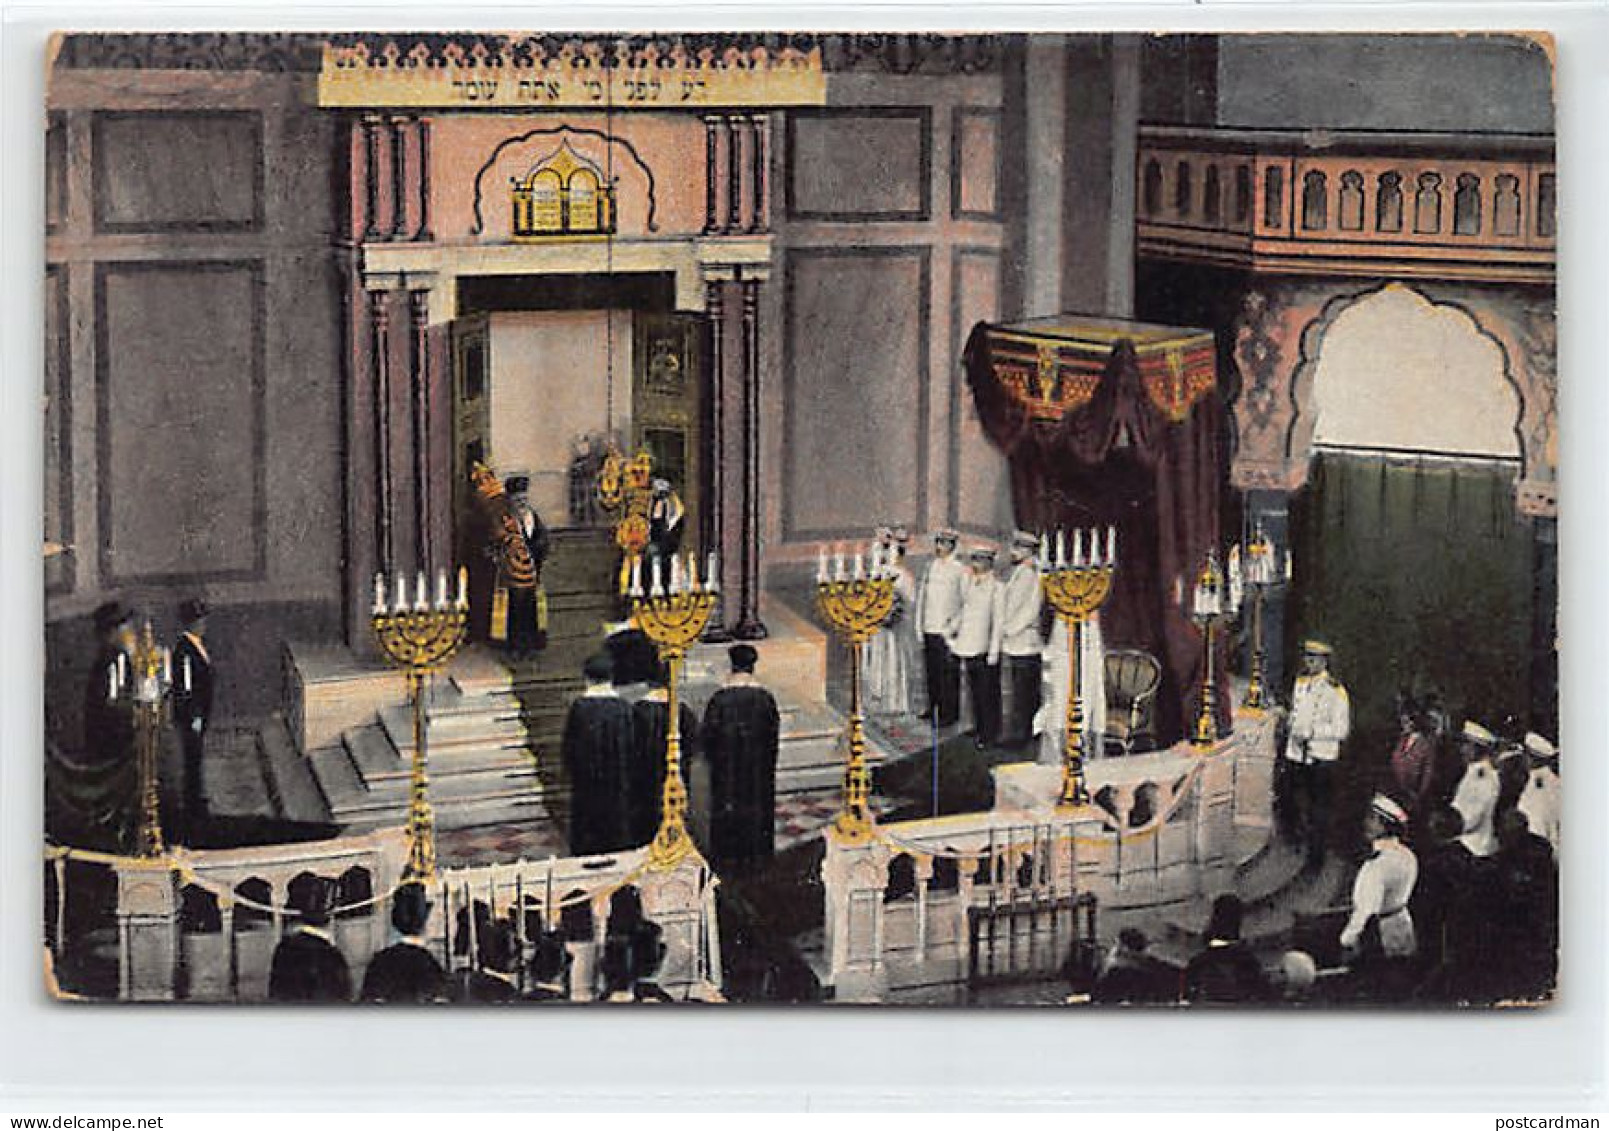 Judaica - BULGARIA - Sofia - The Interior Of The Synagogue During Its Inauguration On 9 September 1909 - Publ. Iv. D. Ba - Judaika